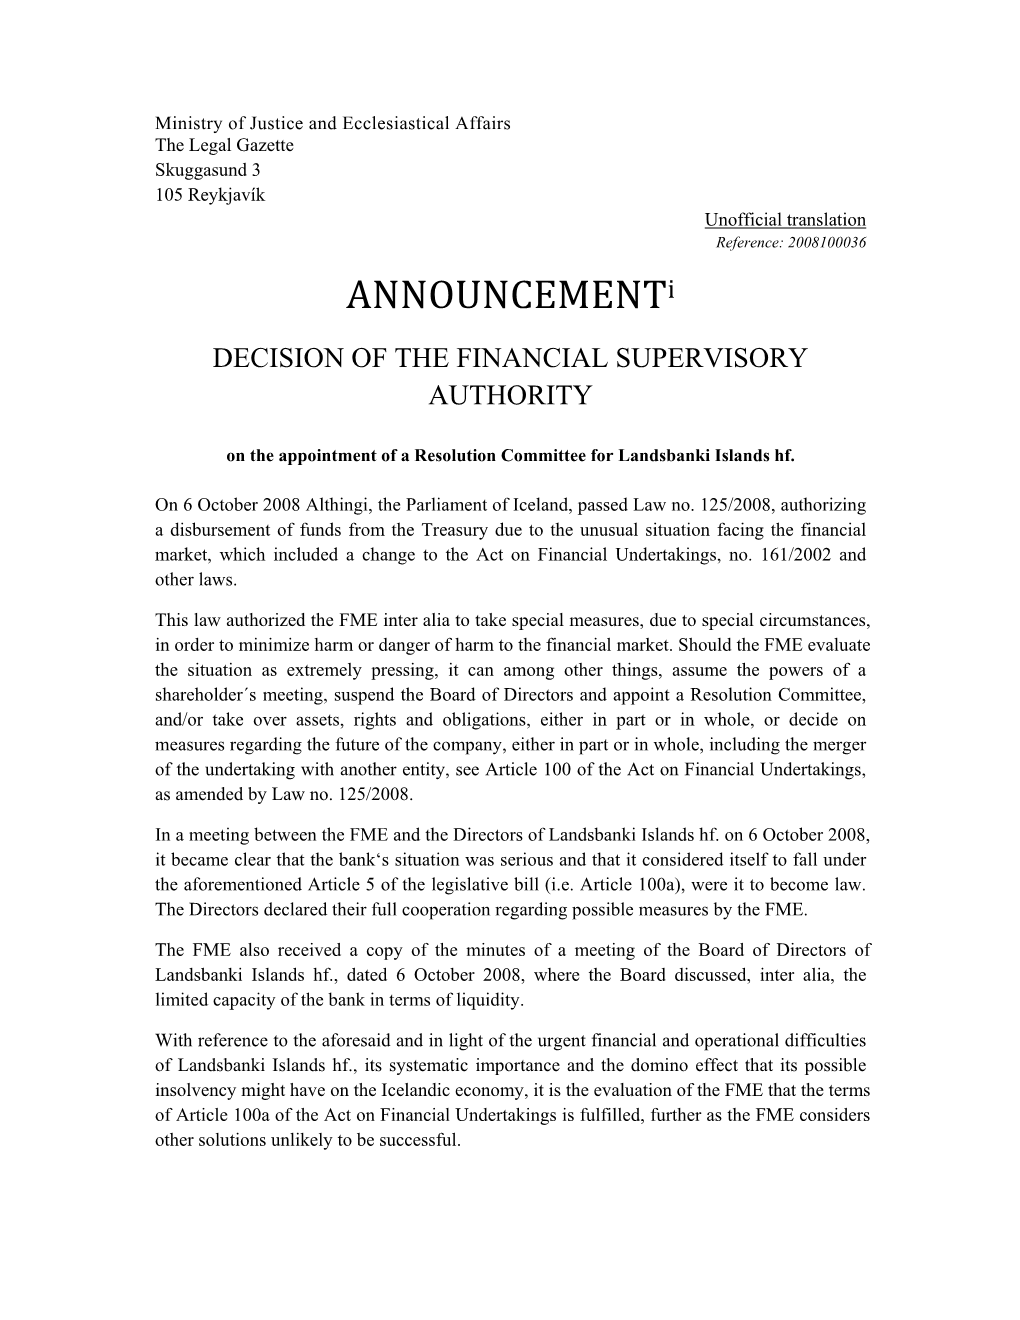 Announcementi DECISION of the FINANCIAL SUPERVISORY AUTHORITY